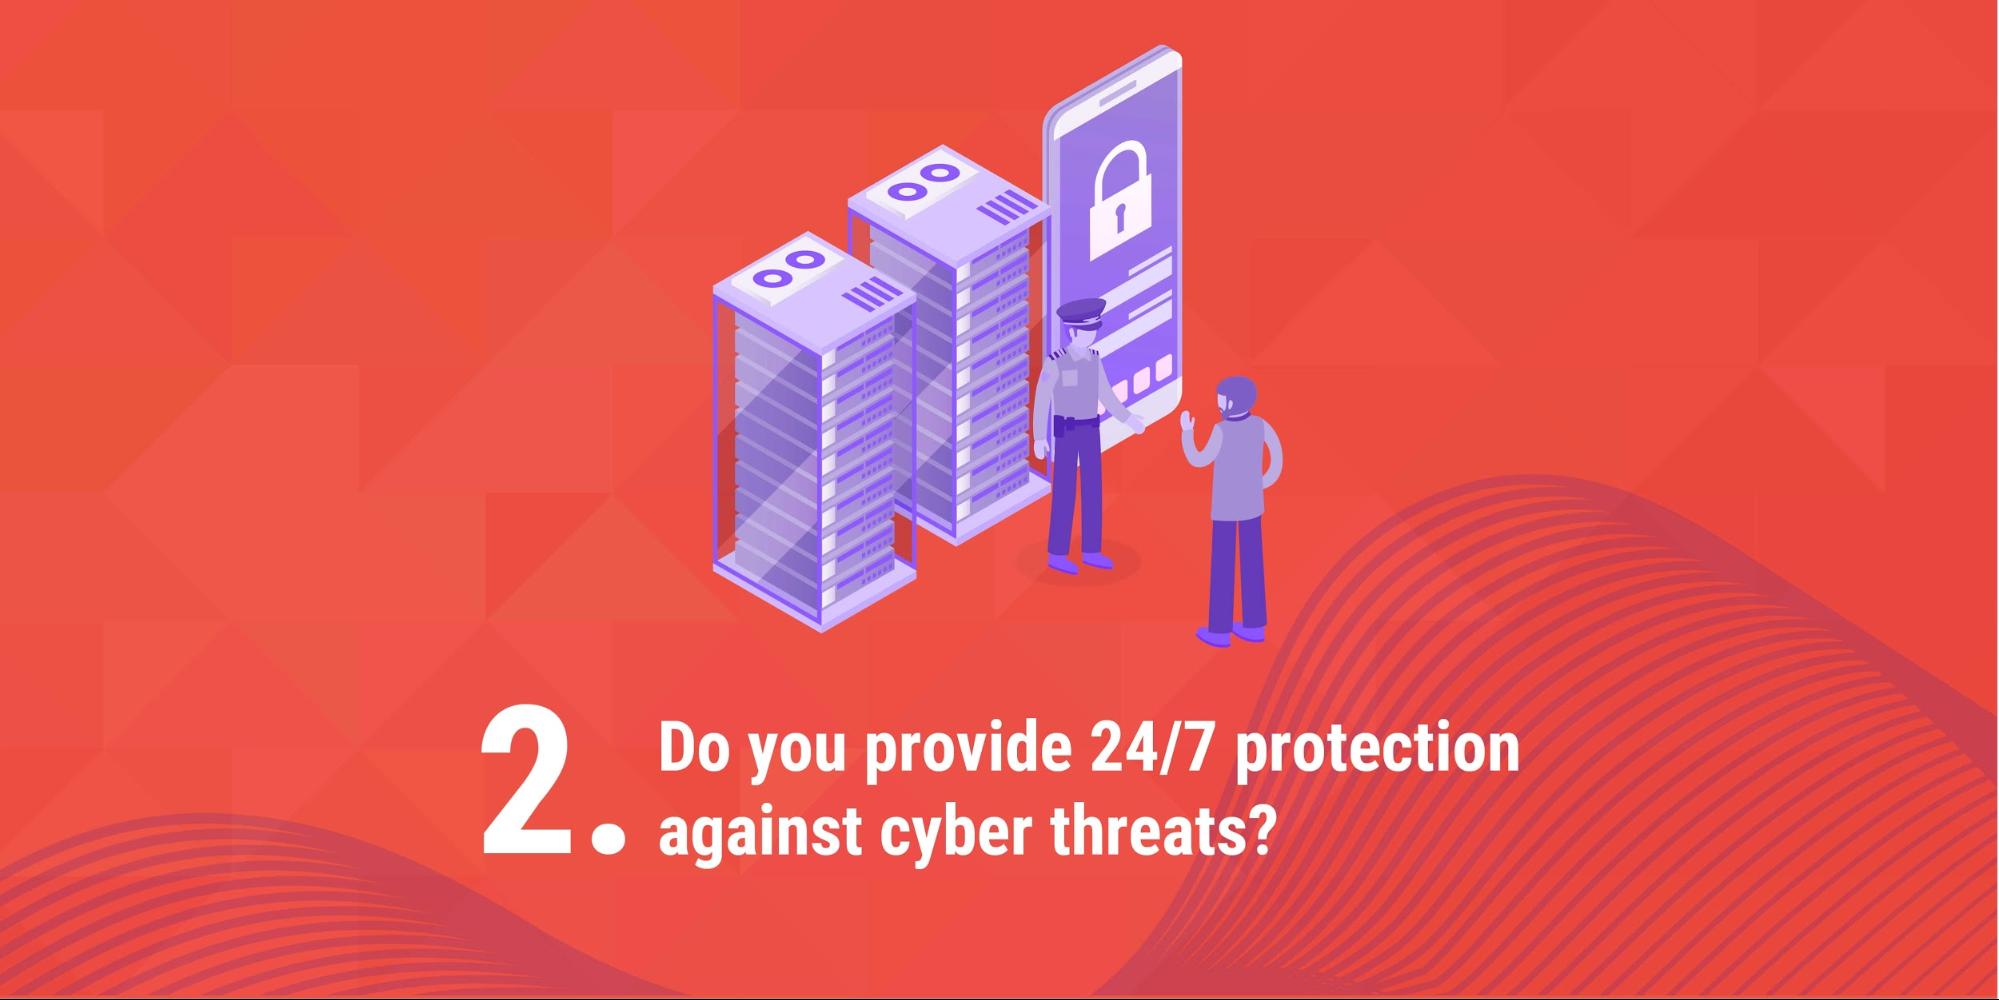 2. Do you provide 24/7 protection against cyber threats?